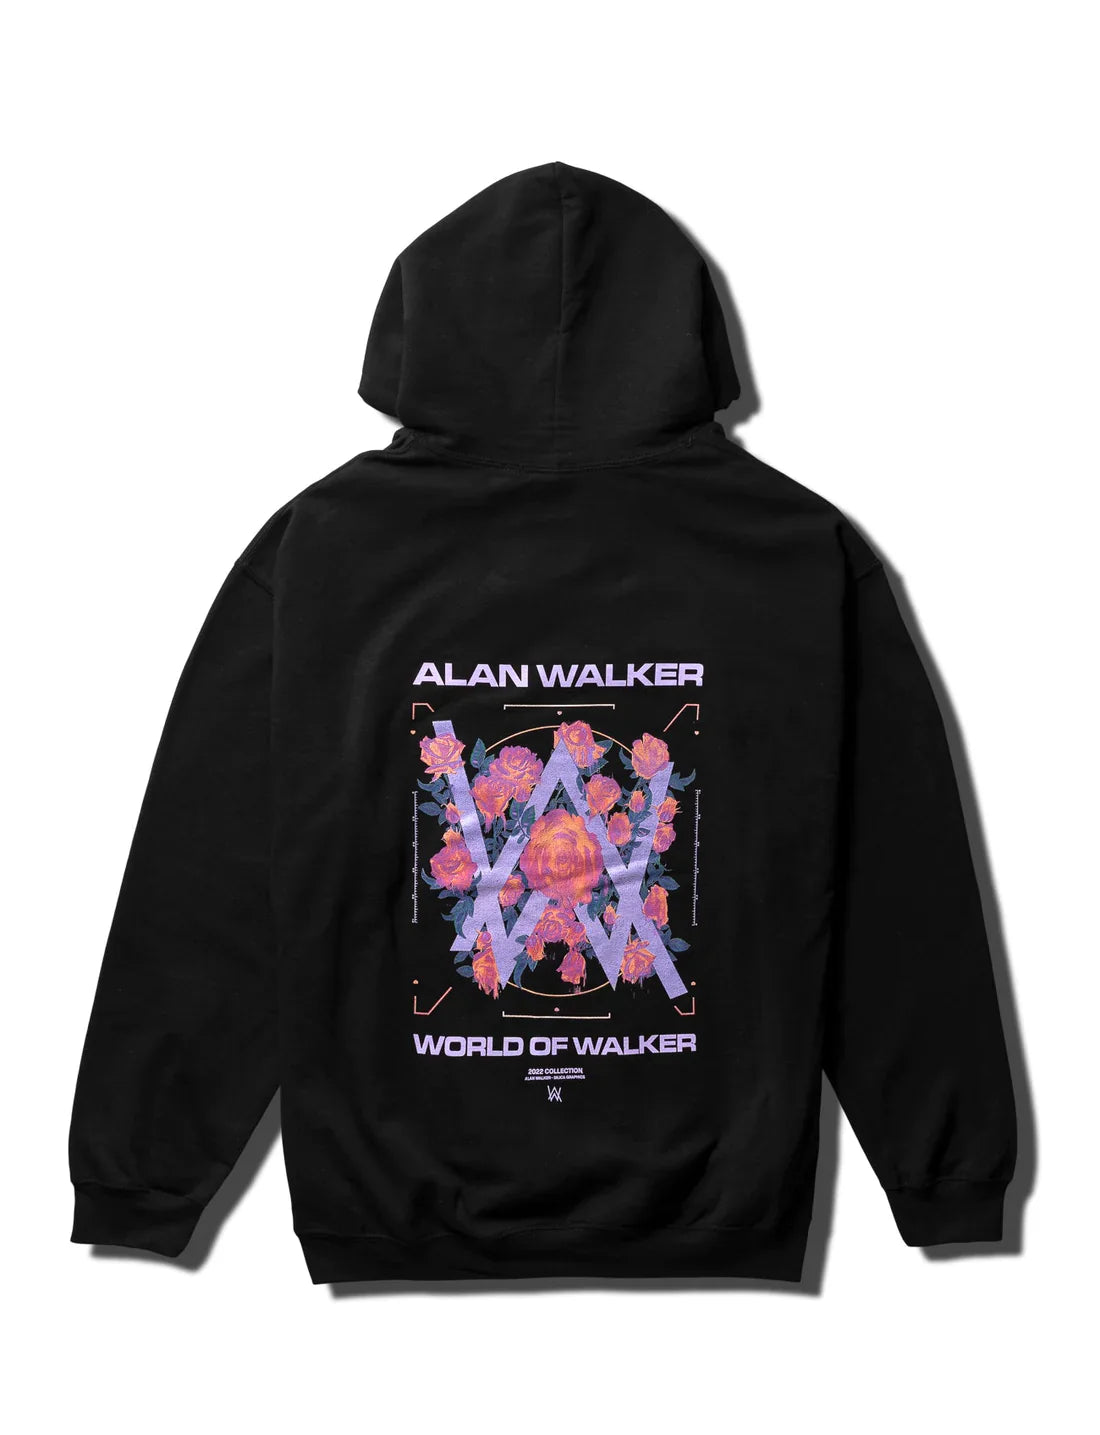 Vibrant back design of the Melting Rose Hoodie, featuring Alan Walker's logo with a floral twist, perfect for standout style.